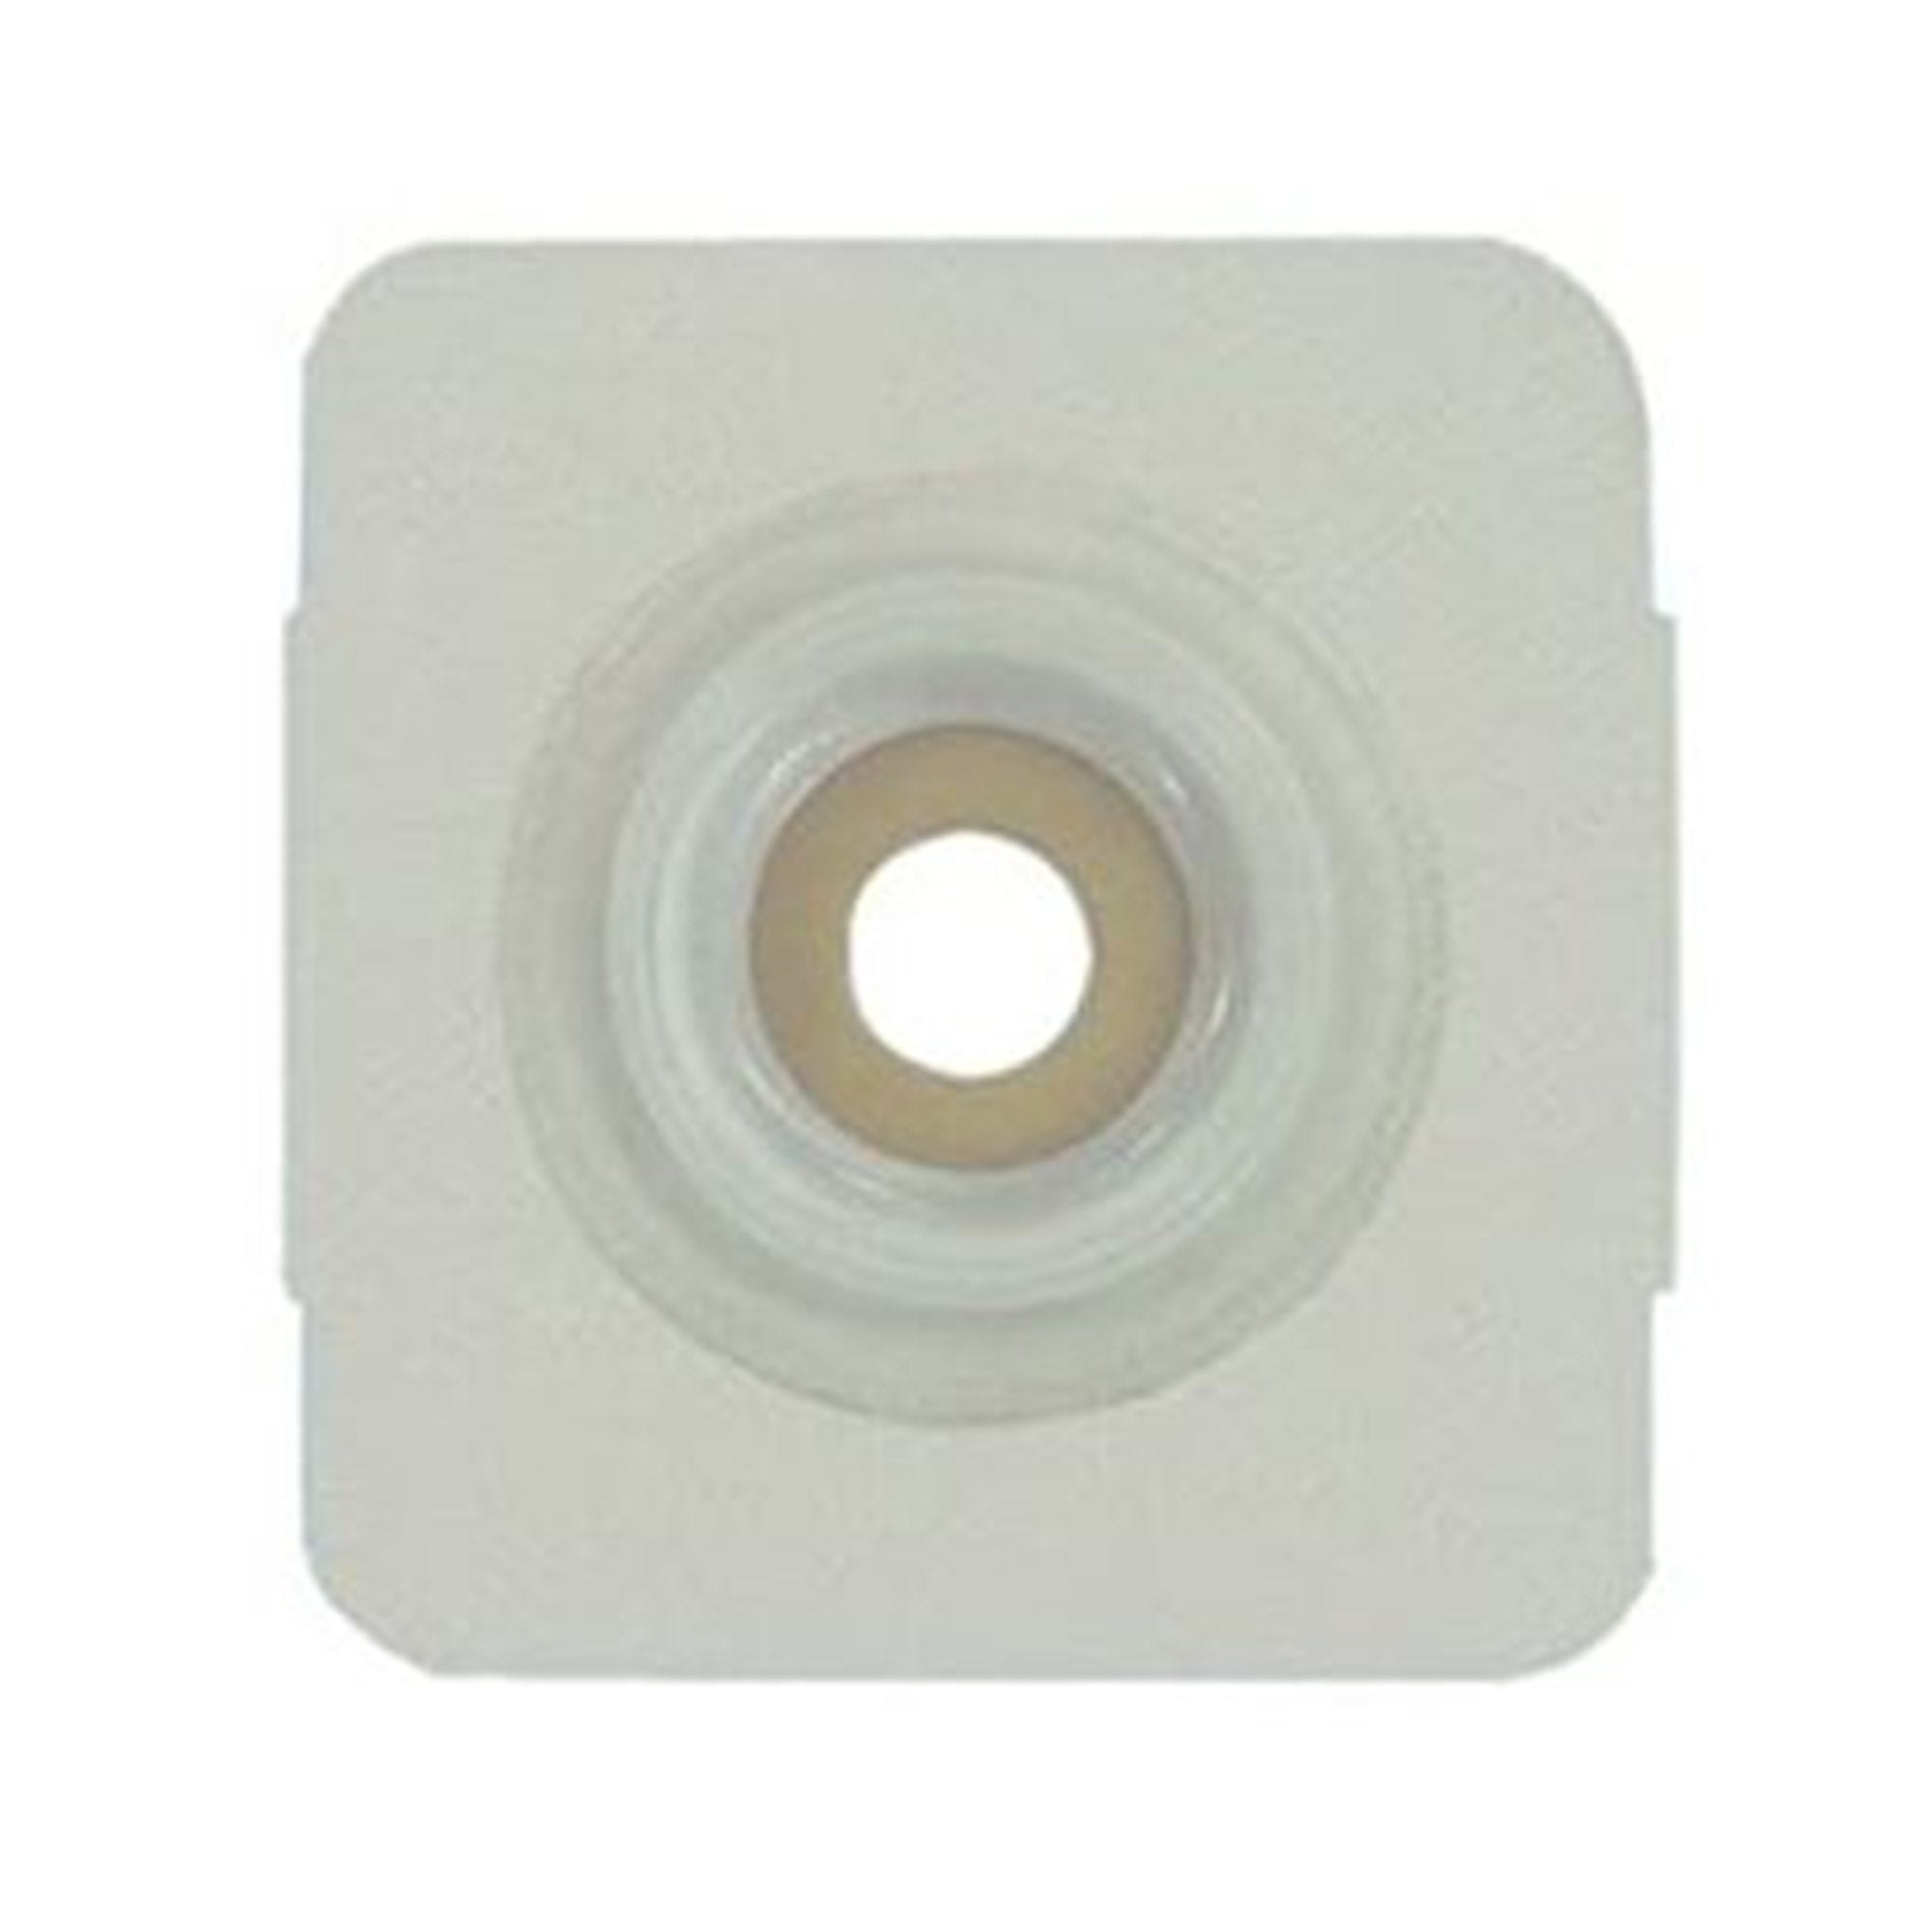 Ostomy Barrier Hollister Trim to Fit, Standard Wear Tape Collar 70 mm Flange 2 Inch Opening 5 X 5 Inch